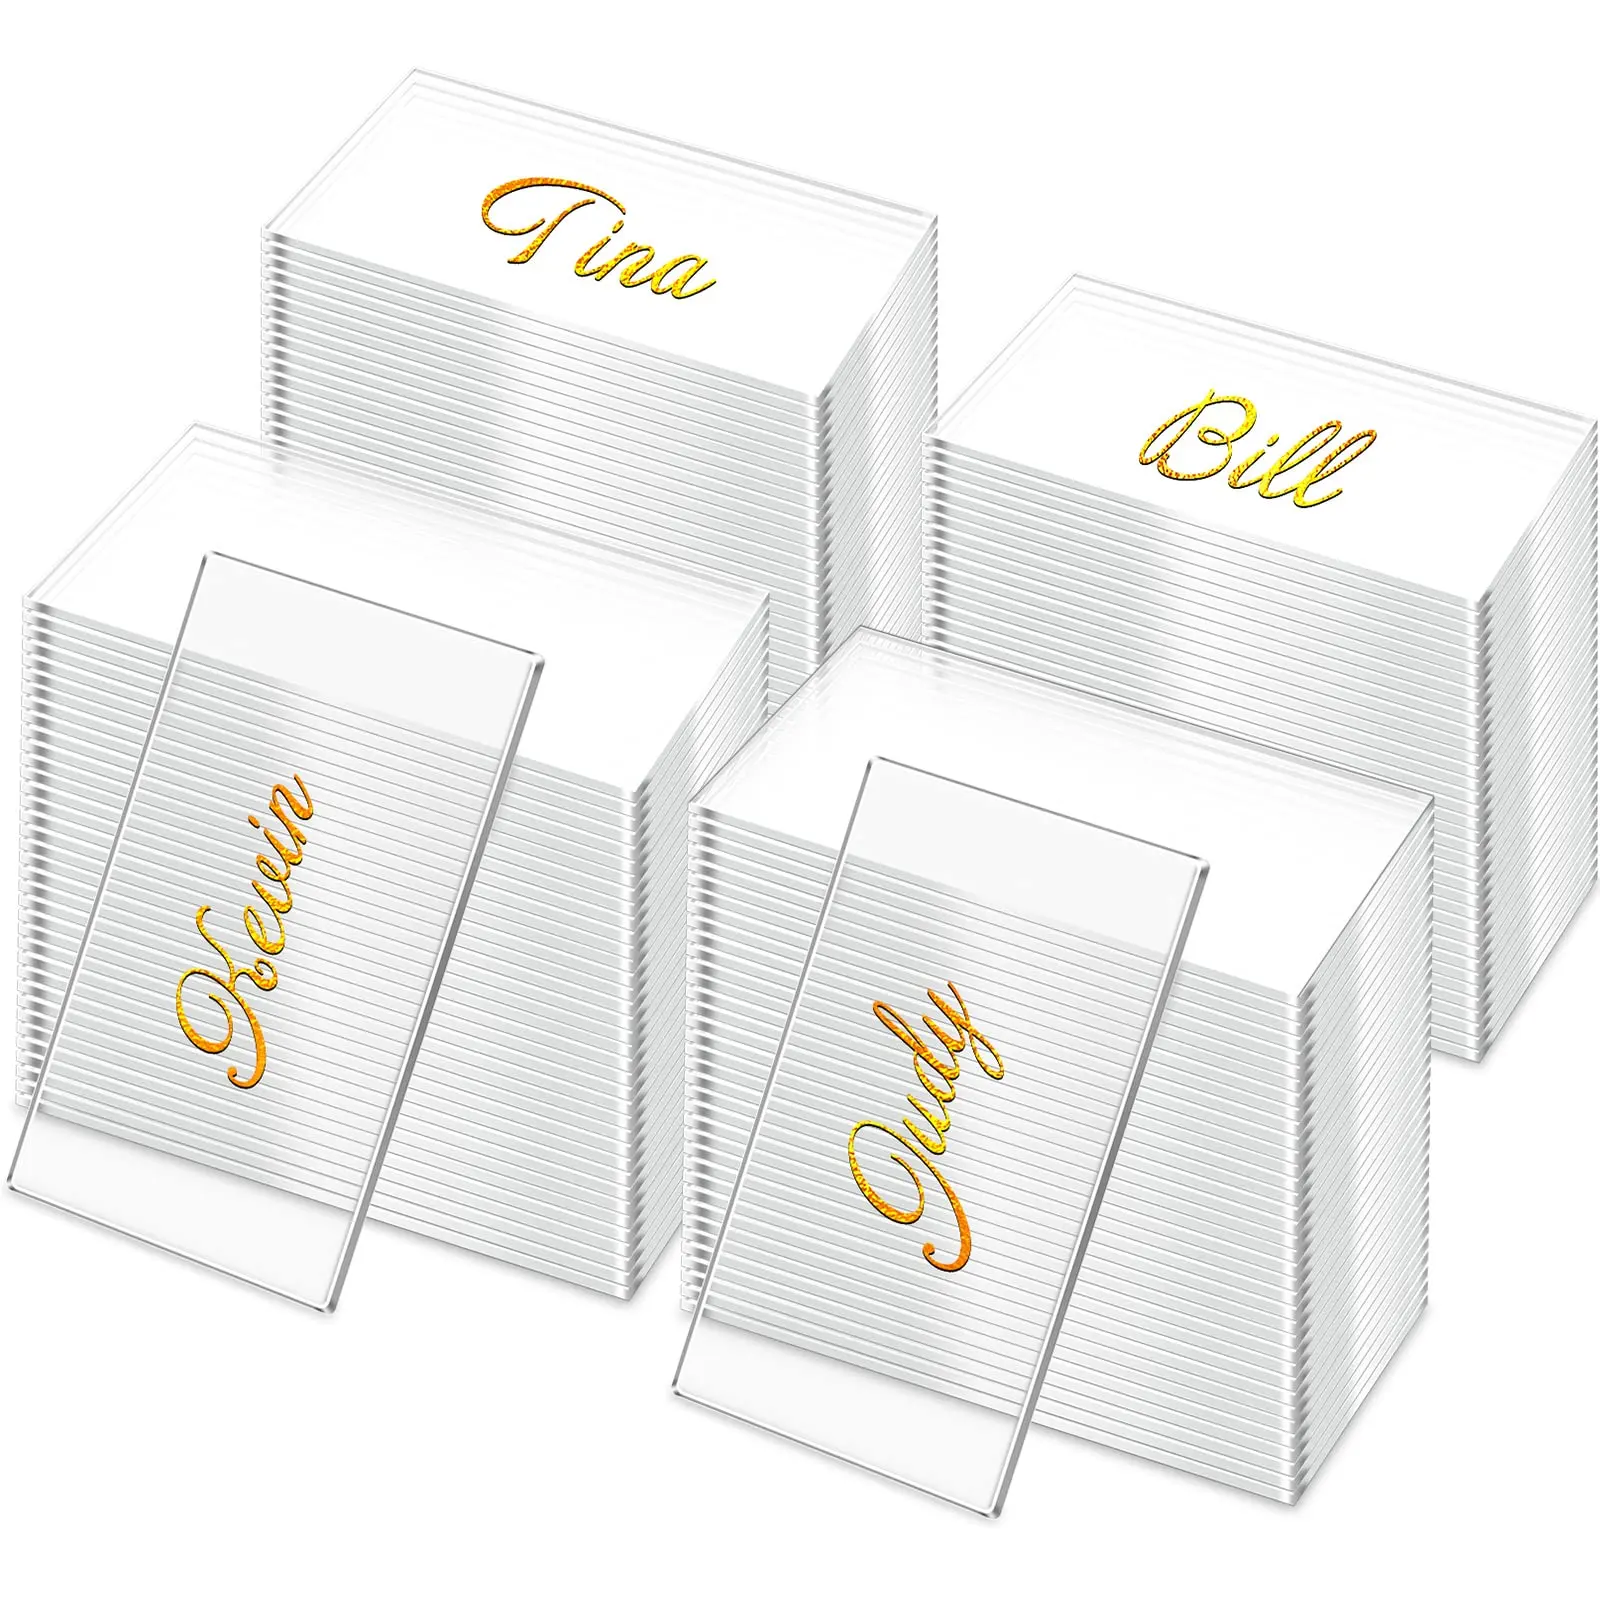 Luxury name plate acrylic name plate laser engraved acrylic plates for wedding names